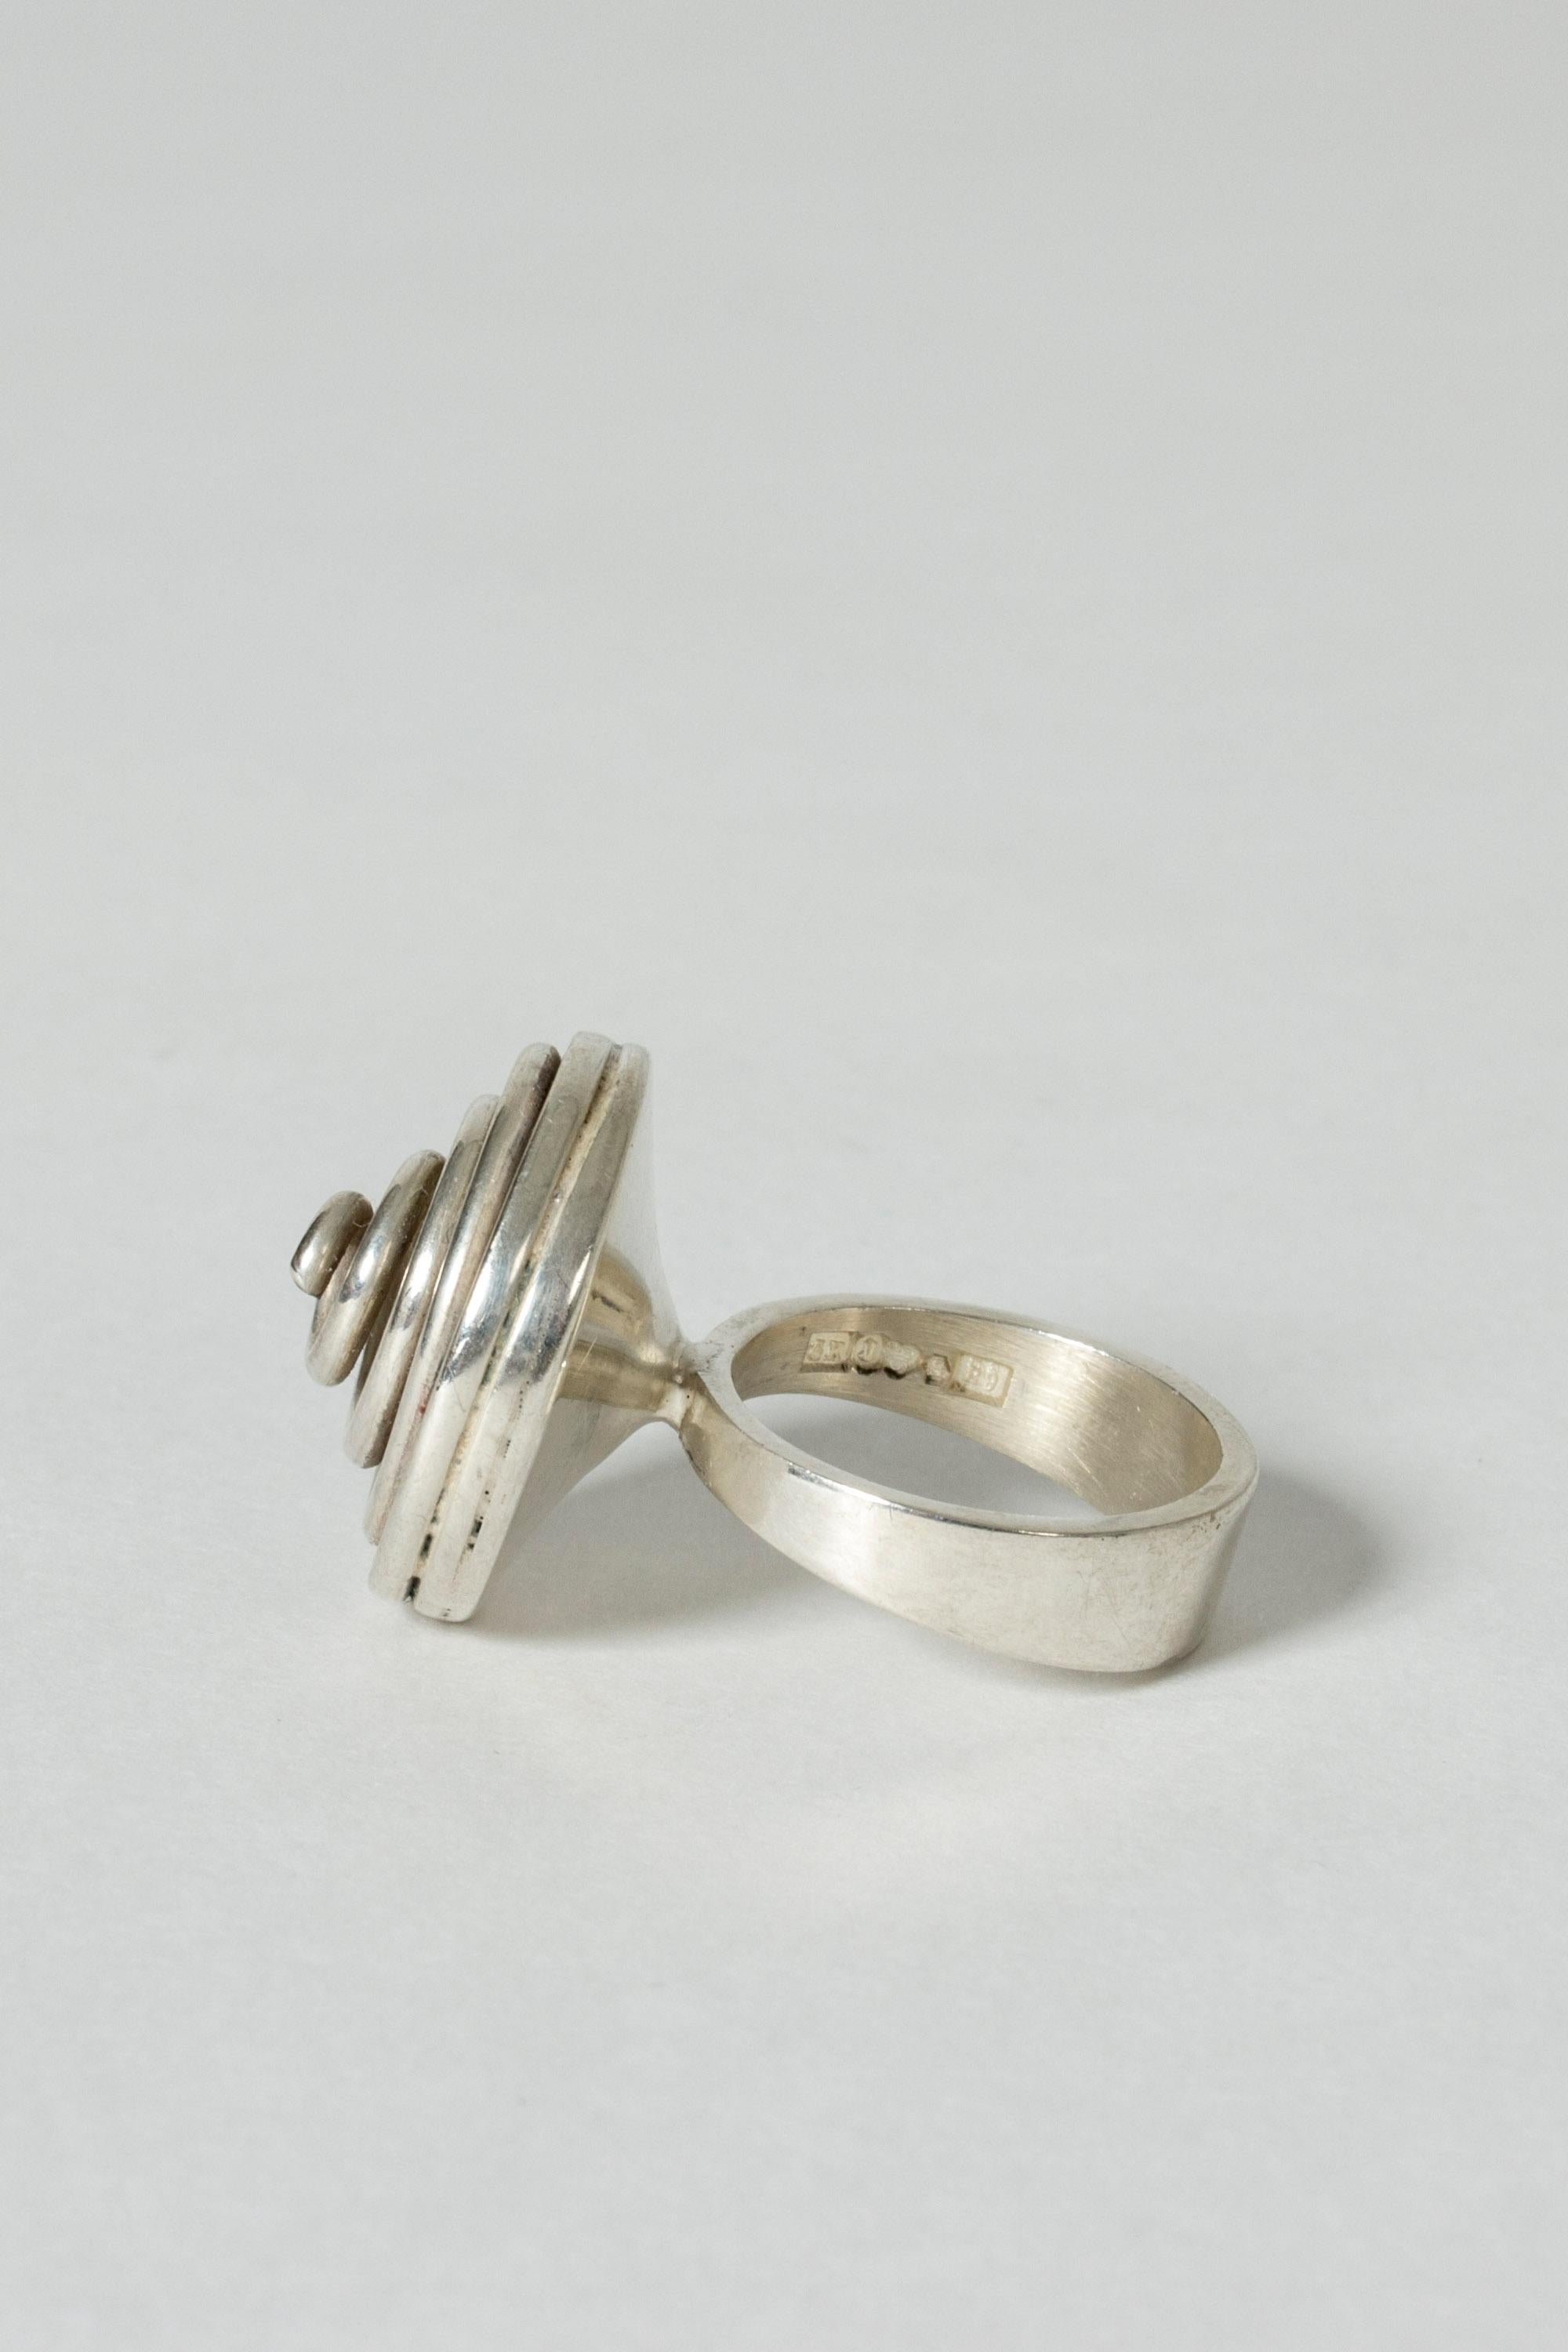 Women's or Men's Silver Spiral Ring with Ball from Kaplans, Sweden, 1967